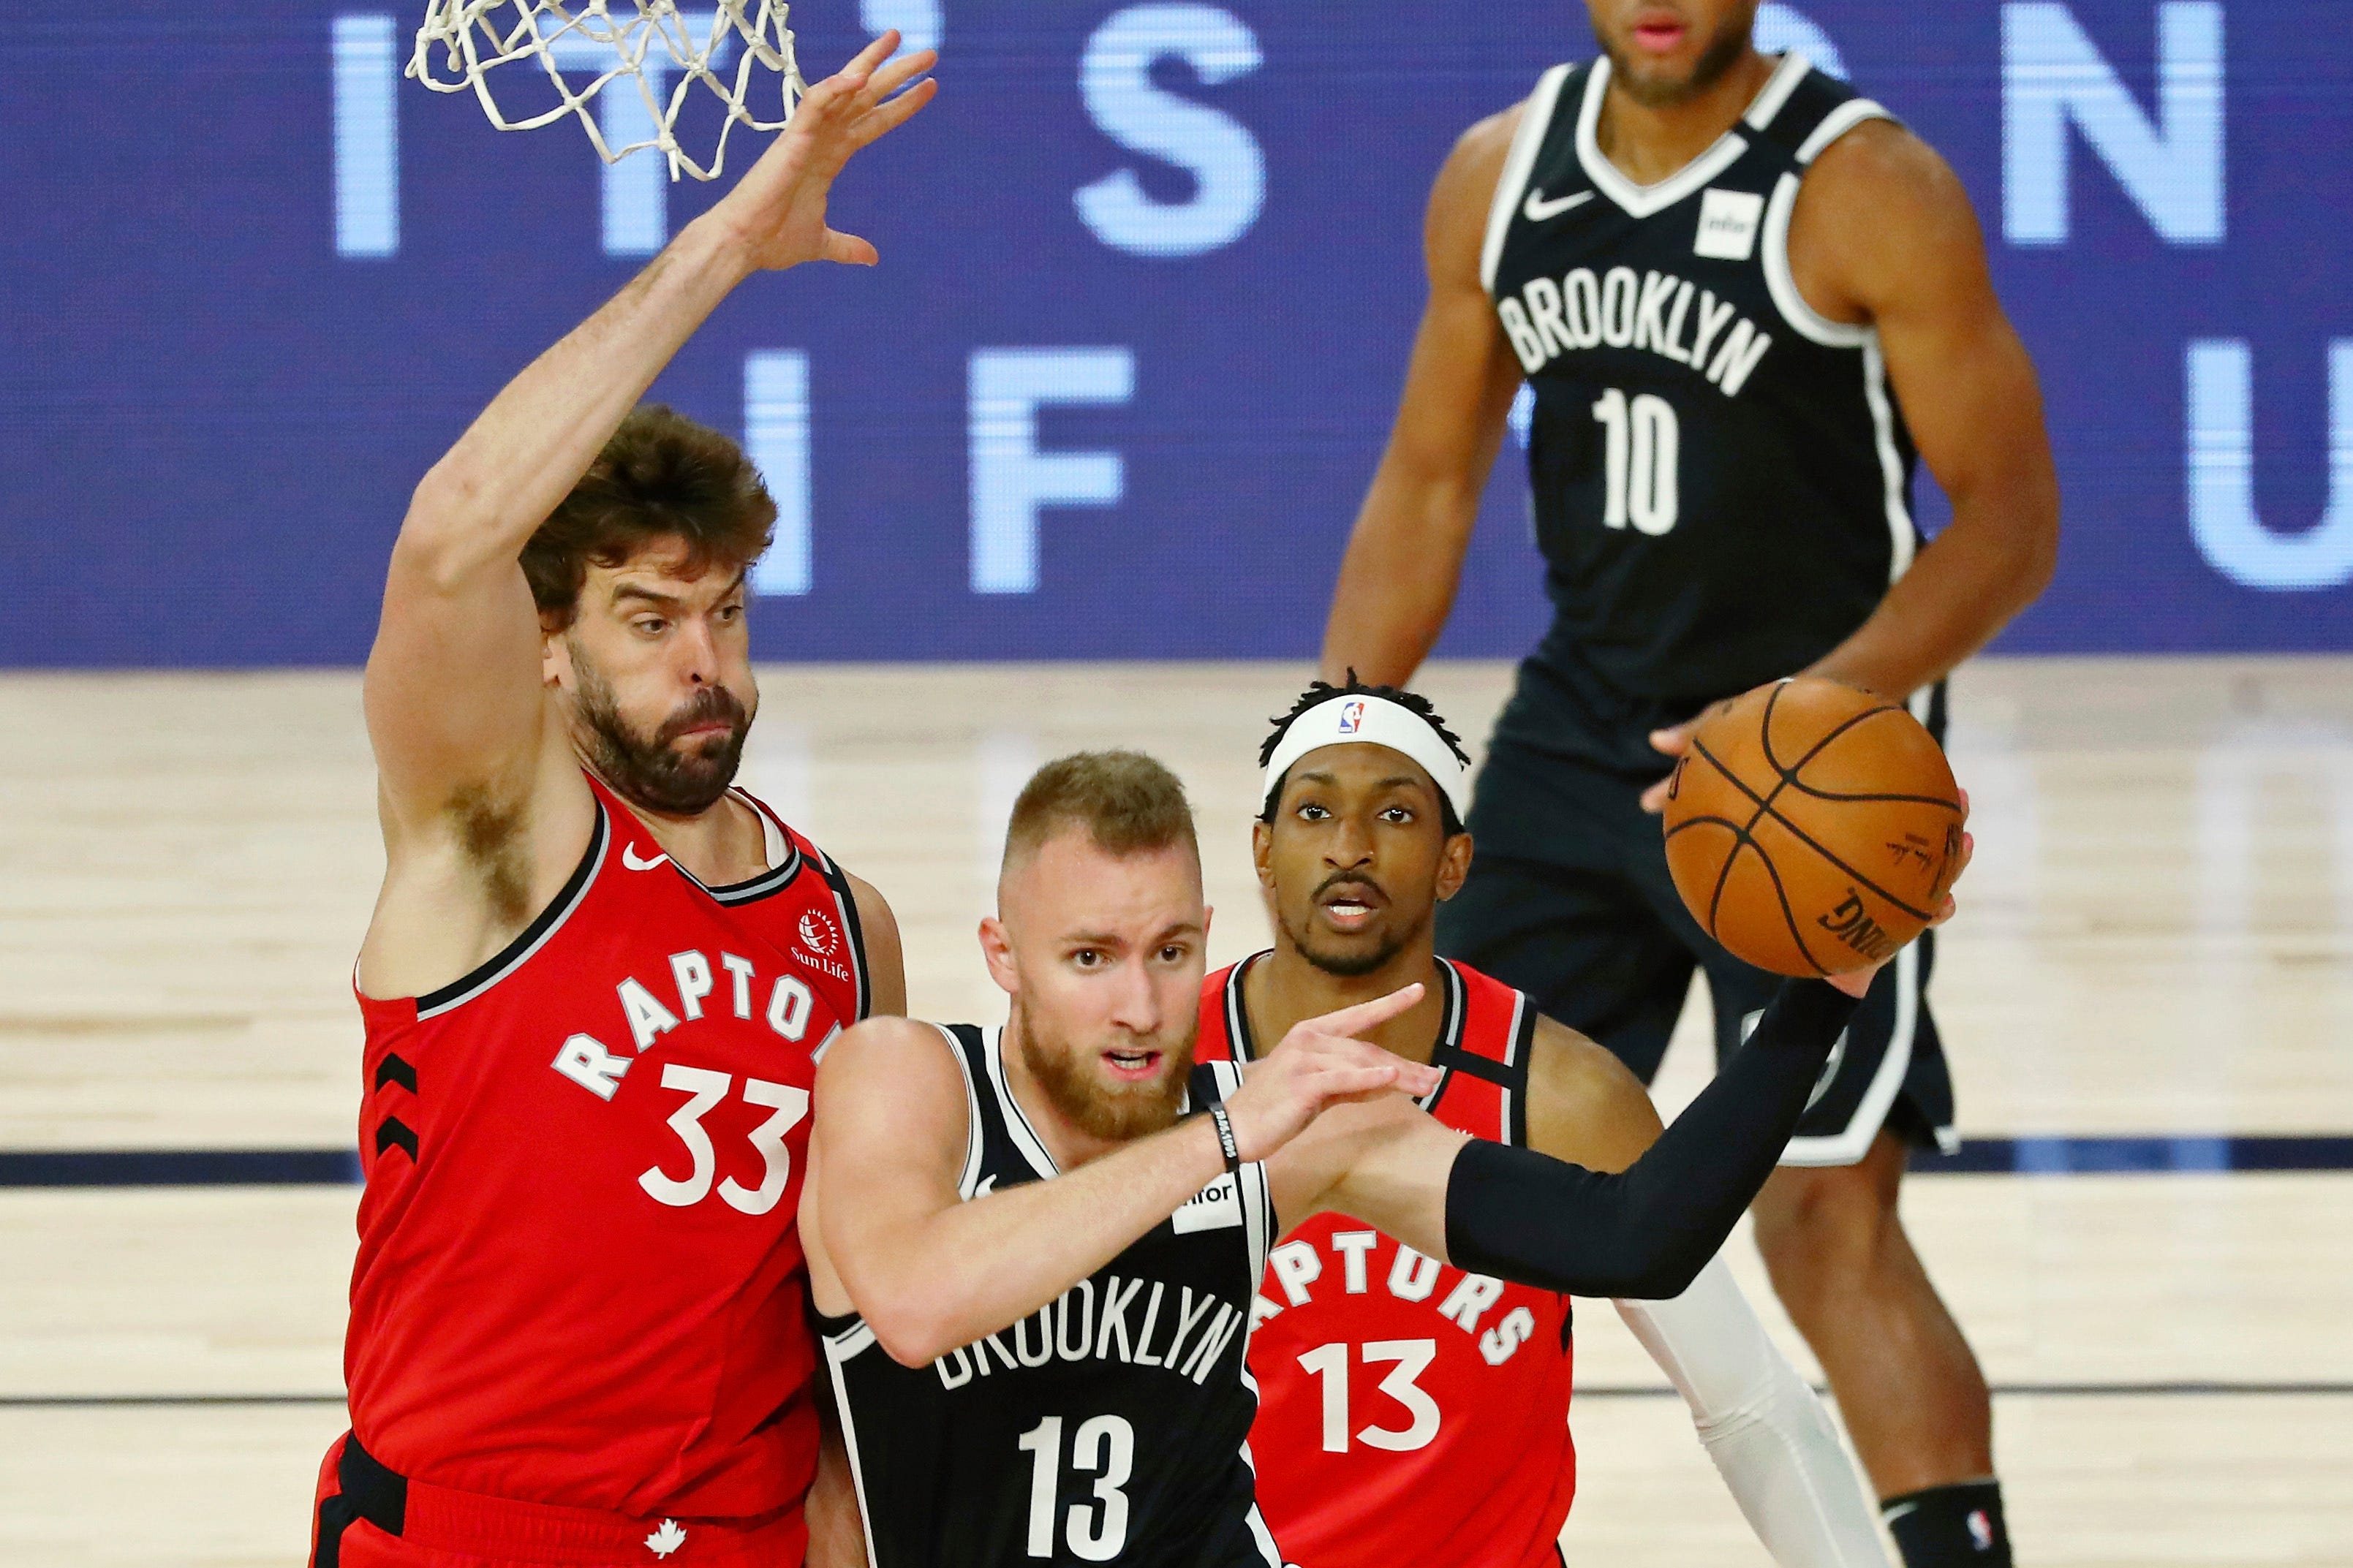 Brooklyn Nets guard Dzanan Musa (13) passes the ball while defended by Toronto Raptors center Marc Gasol (33) during the second half in Game 3 of an NBA basketball first-round playoff series, Friday, Aug. 21, 2020, in Lake Buena Vista, Fla.